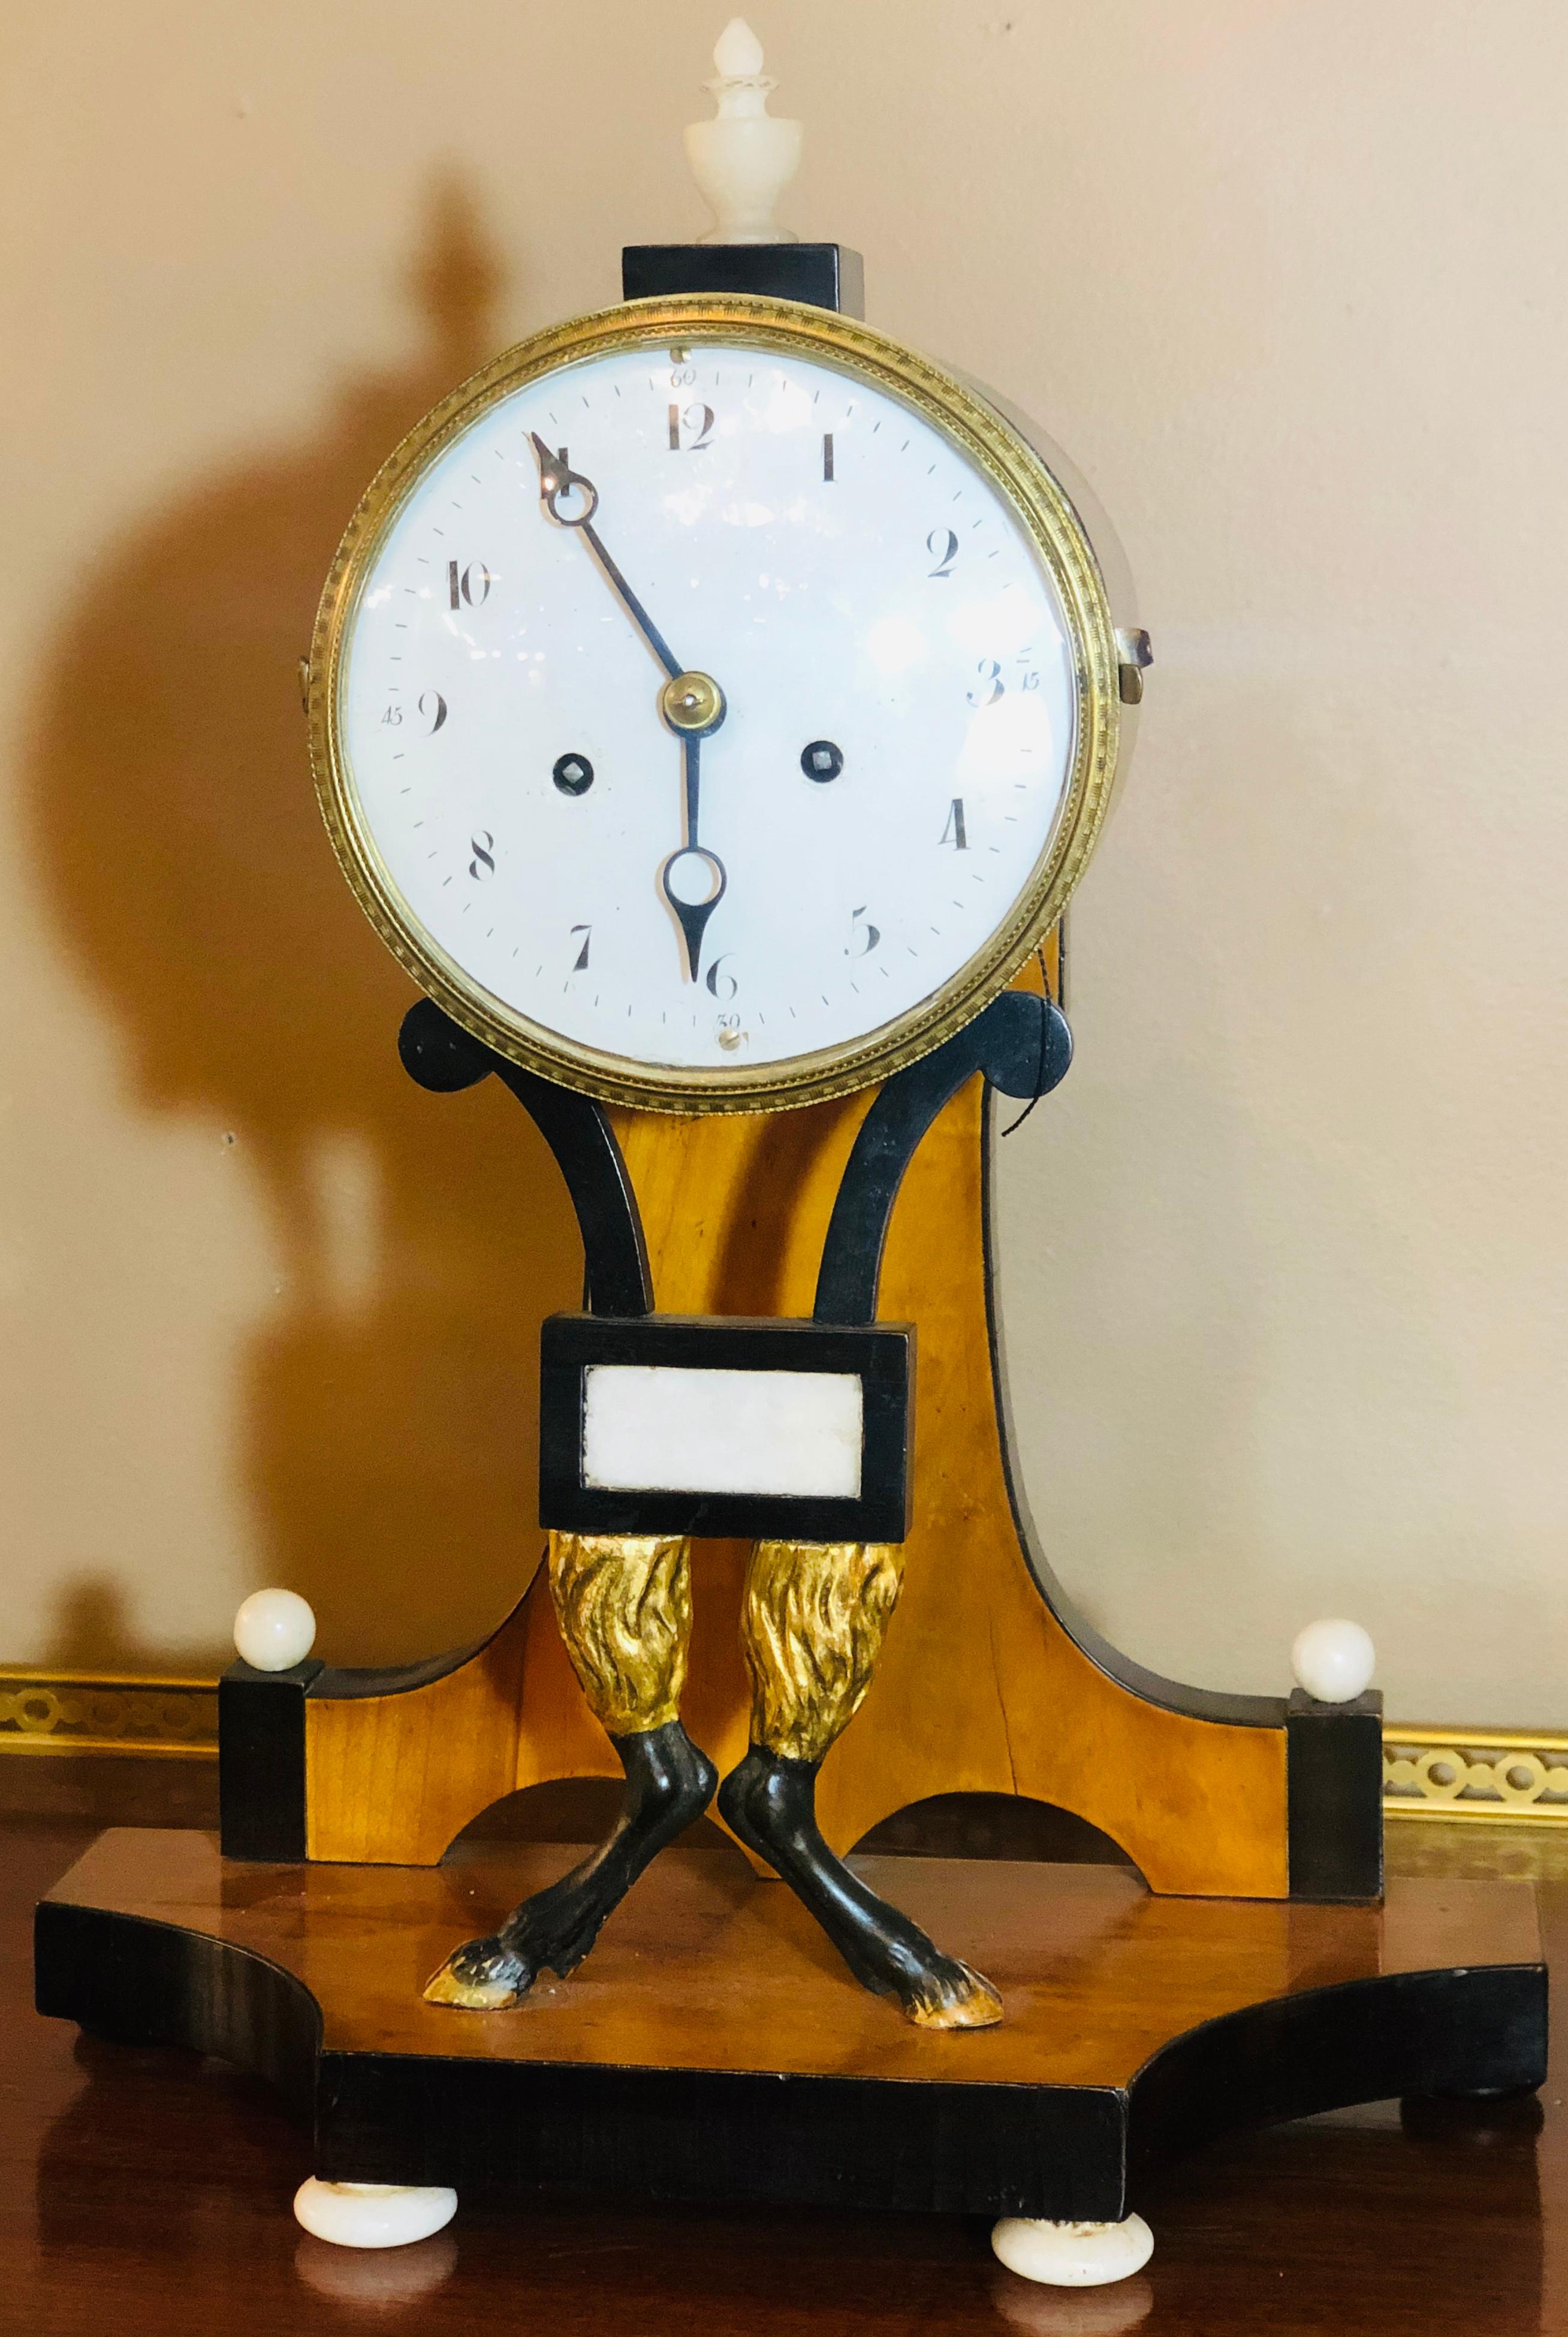 Fine Biedermeier clock with ebonized details and unusual hoof legs with silk suspension. Is in working order at time of listing, having pendulum and key. First quarter of the 19th century (1815-1848). This is a stunning example of Biedermeier at its